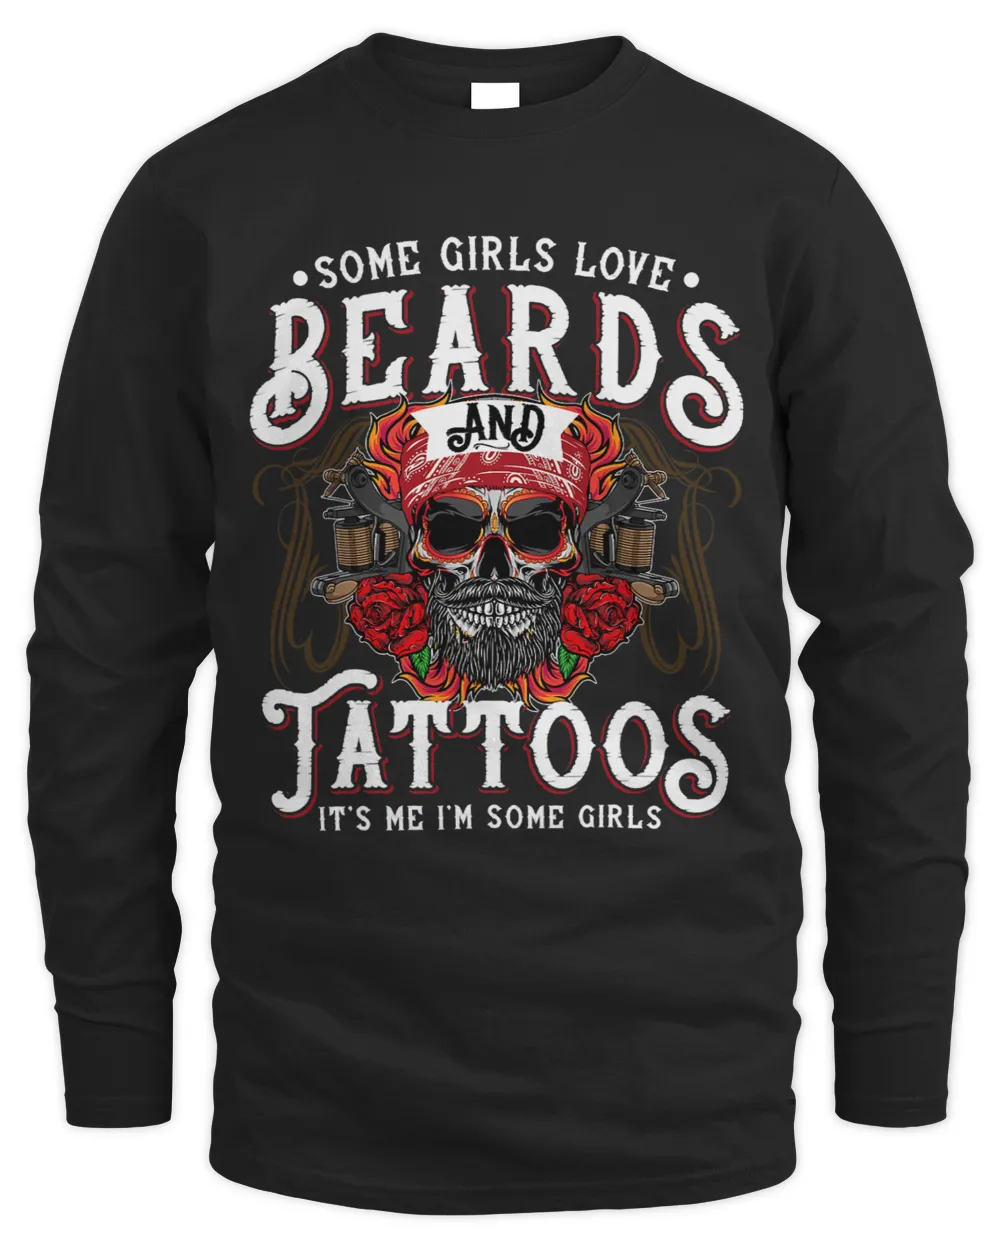 Some Girls Love Beards And Tattoos Its Me Im Some Girls 1